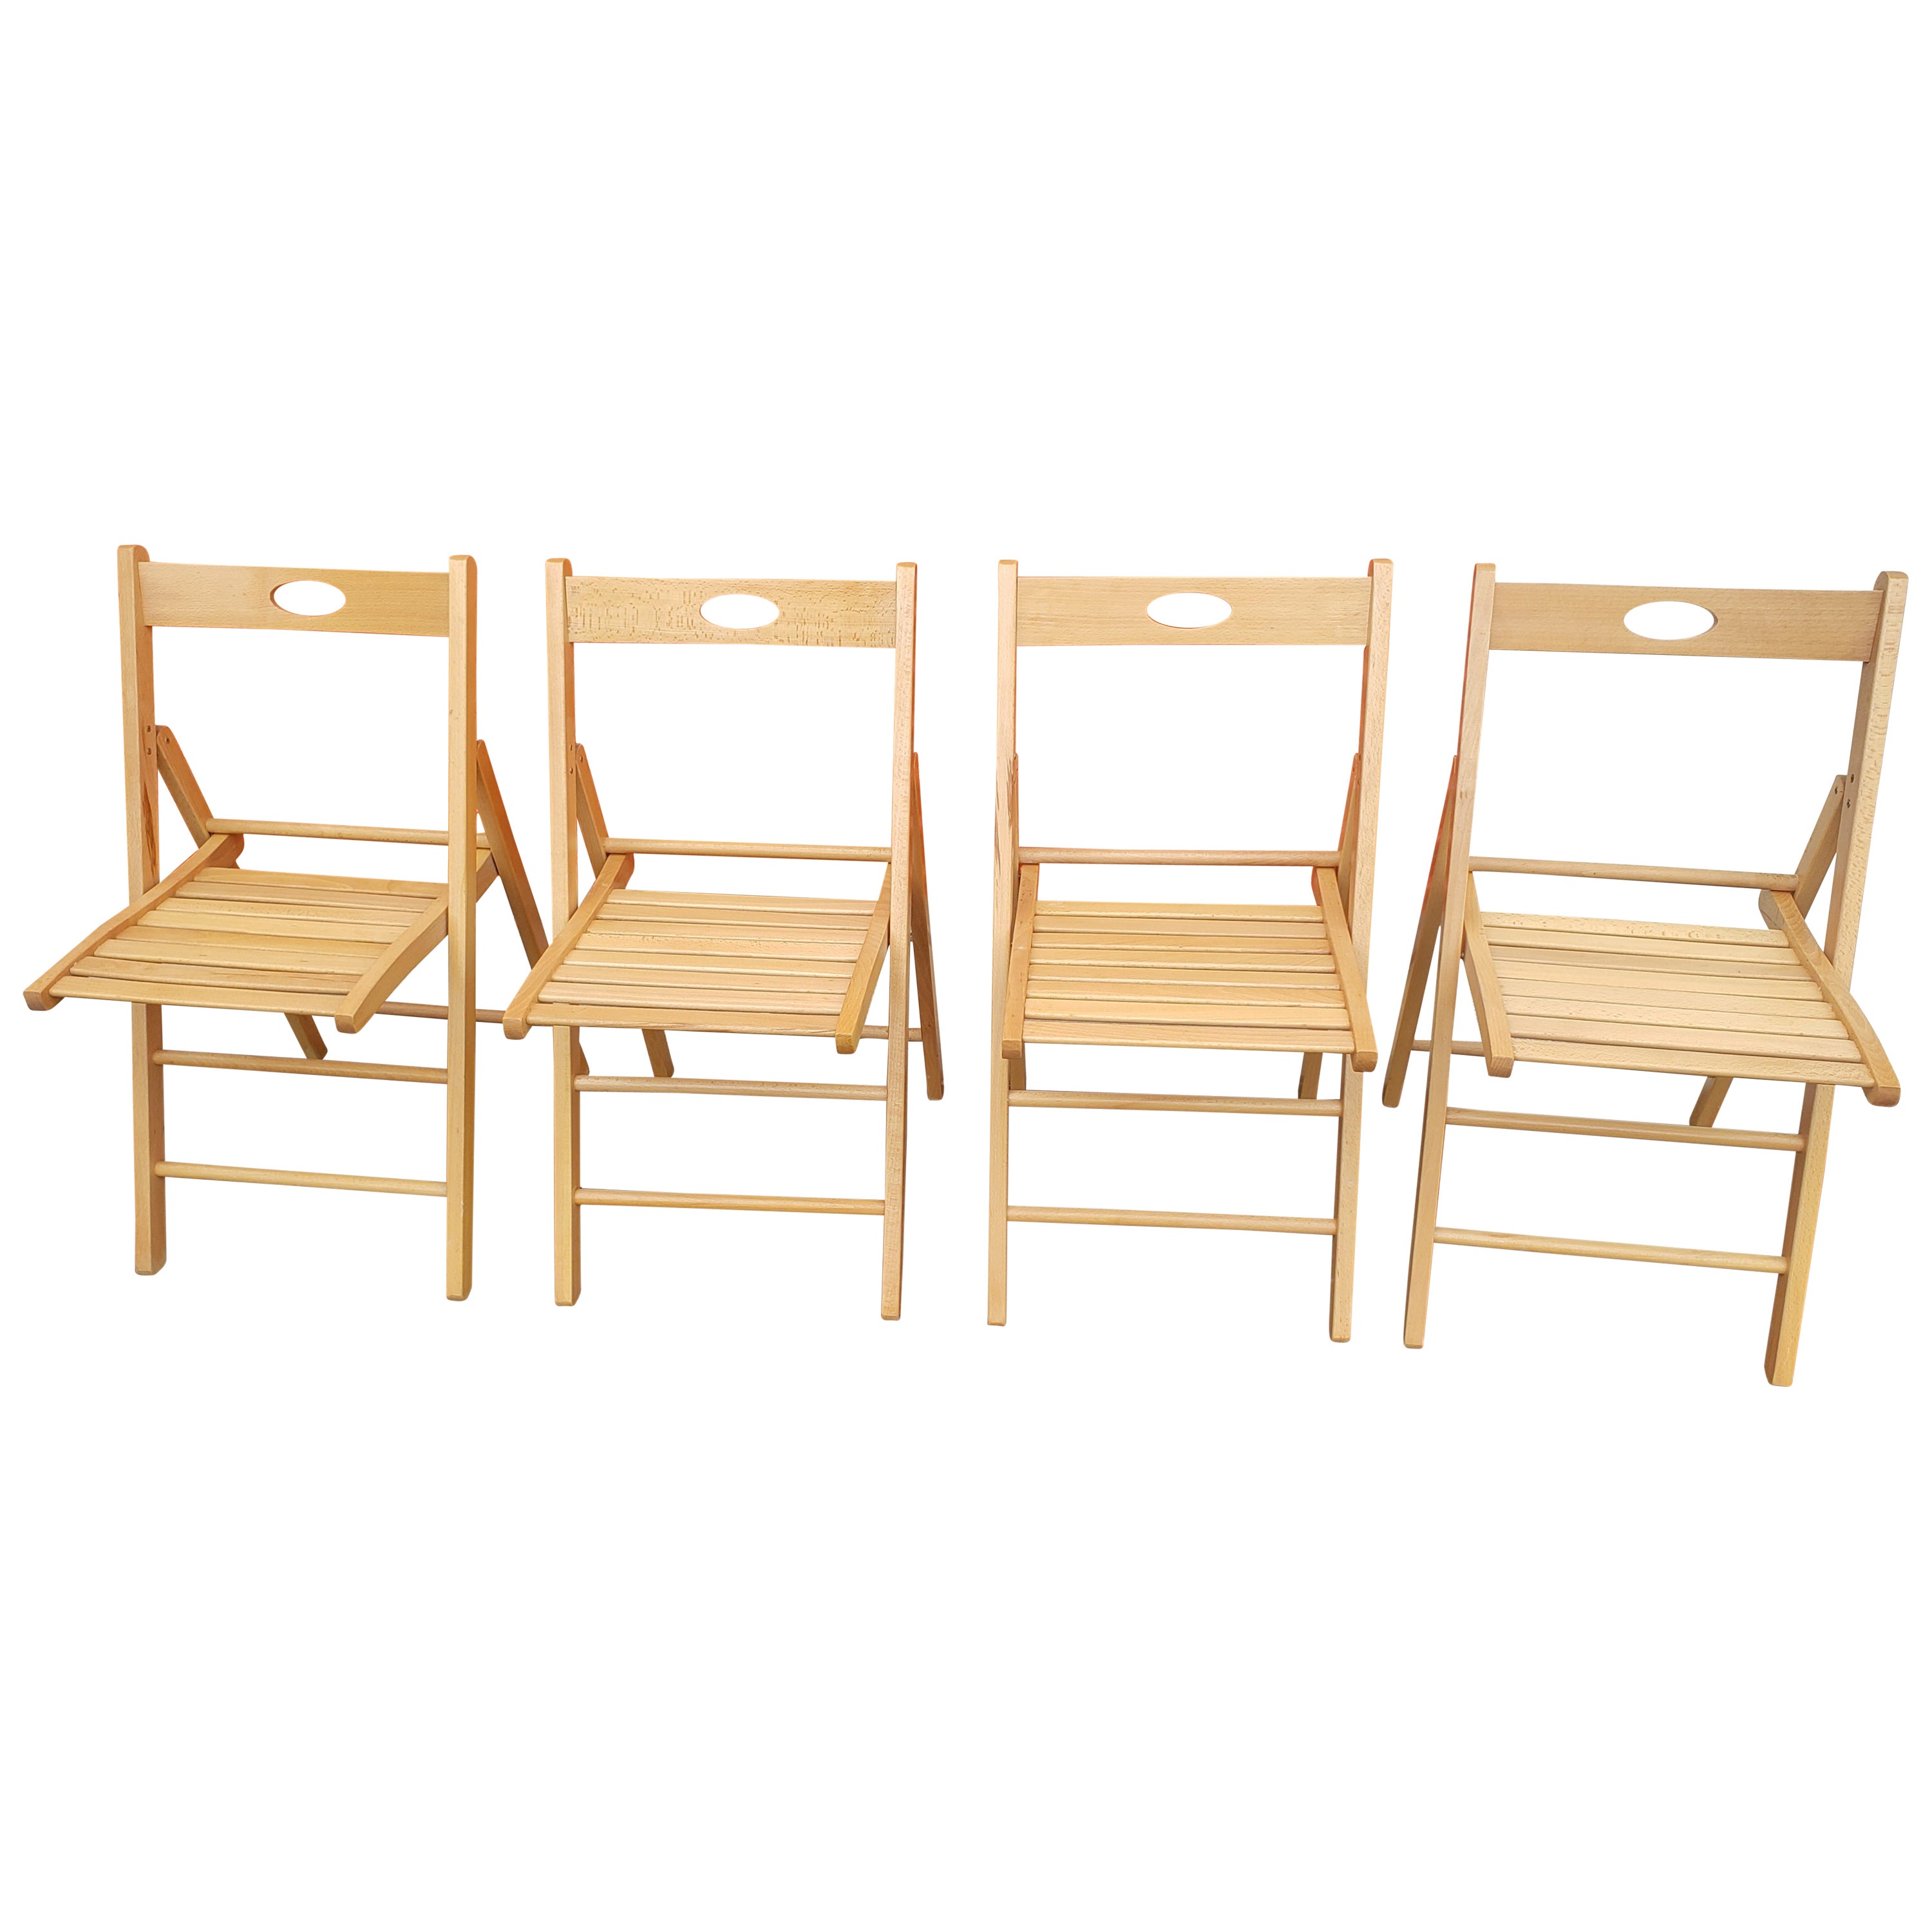 Vintage Solid White Ash Wood Italian Folding Chairs, Set of 4